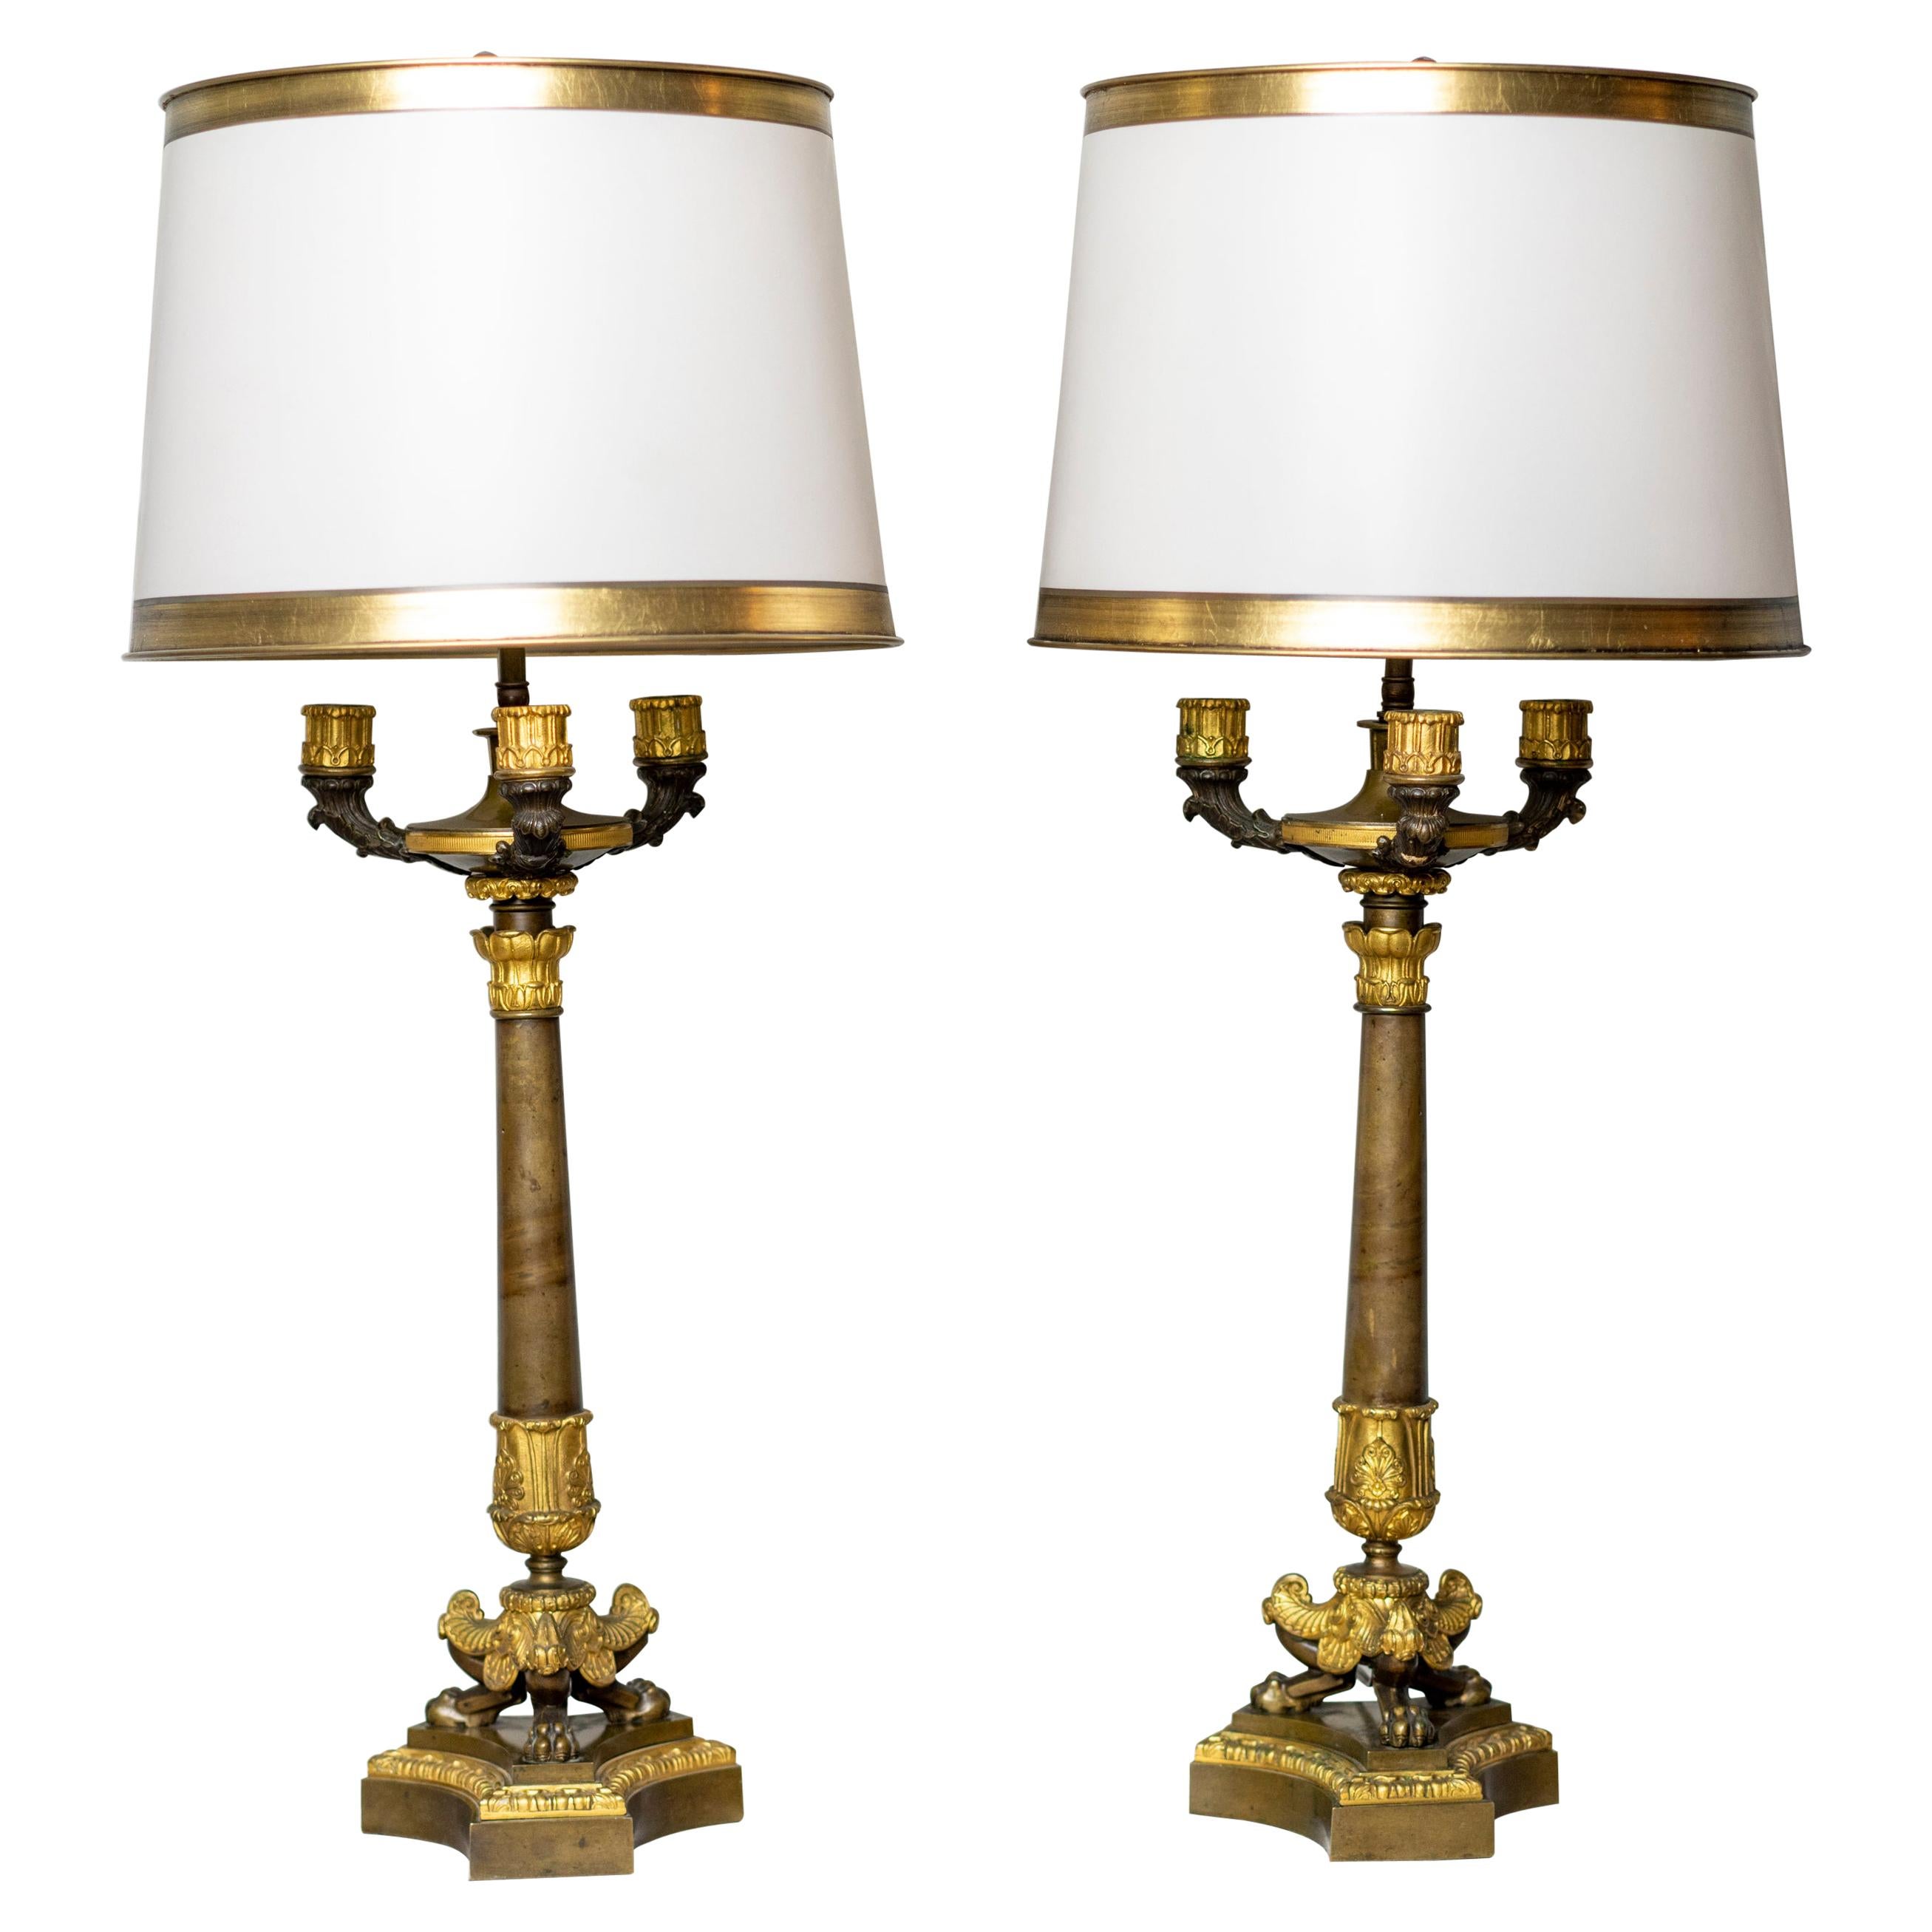 Pair of Gilt and Patinated Bronze Restauration Period Candelabra Lamps